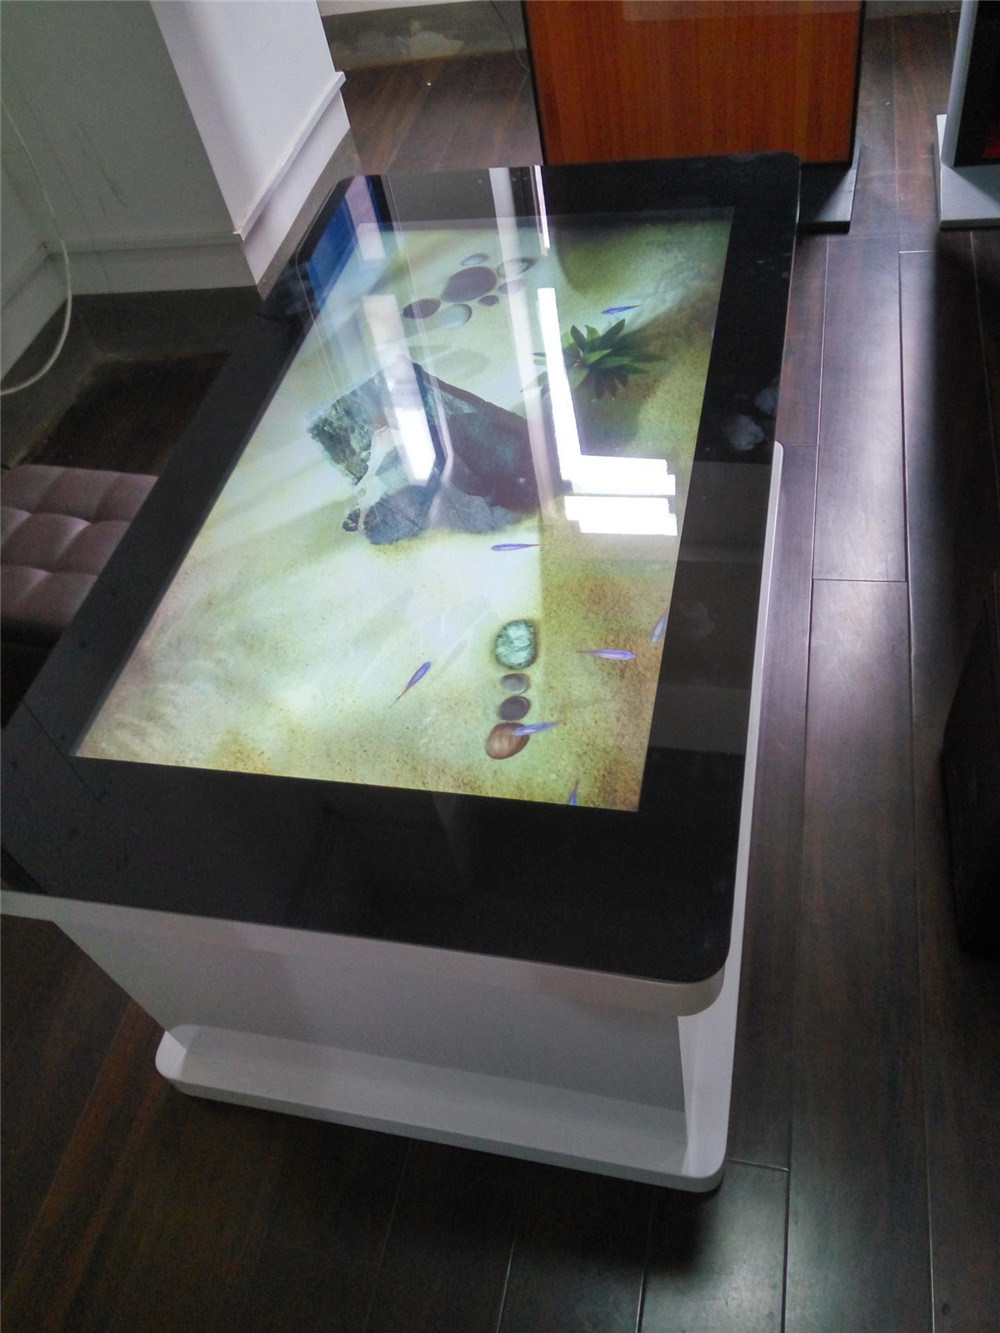 Interactive Indoor LED Multi Touch Screen Coffee Table for Game/Conference/Restaurant